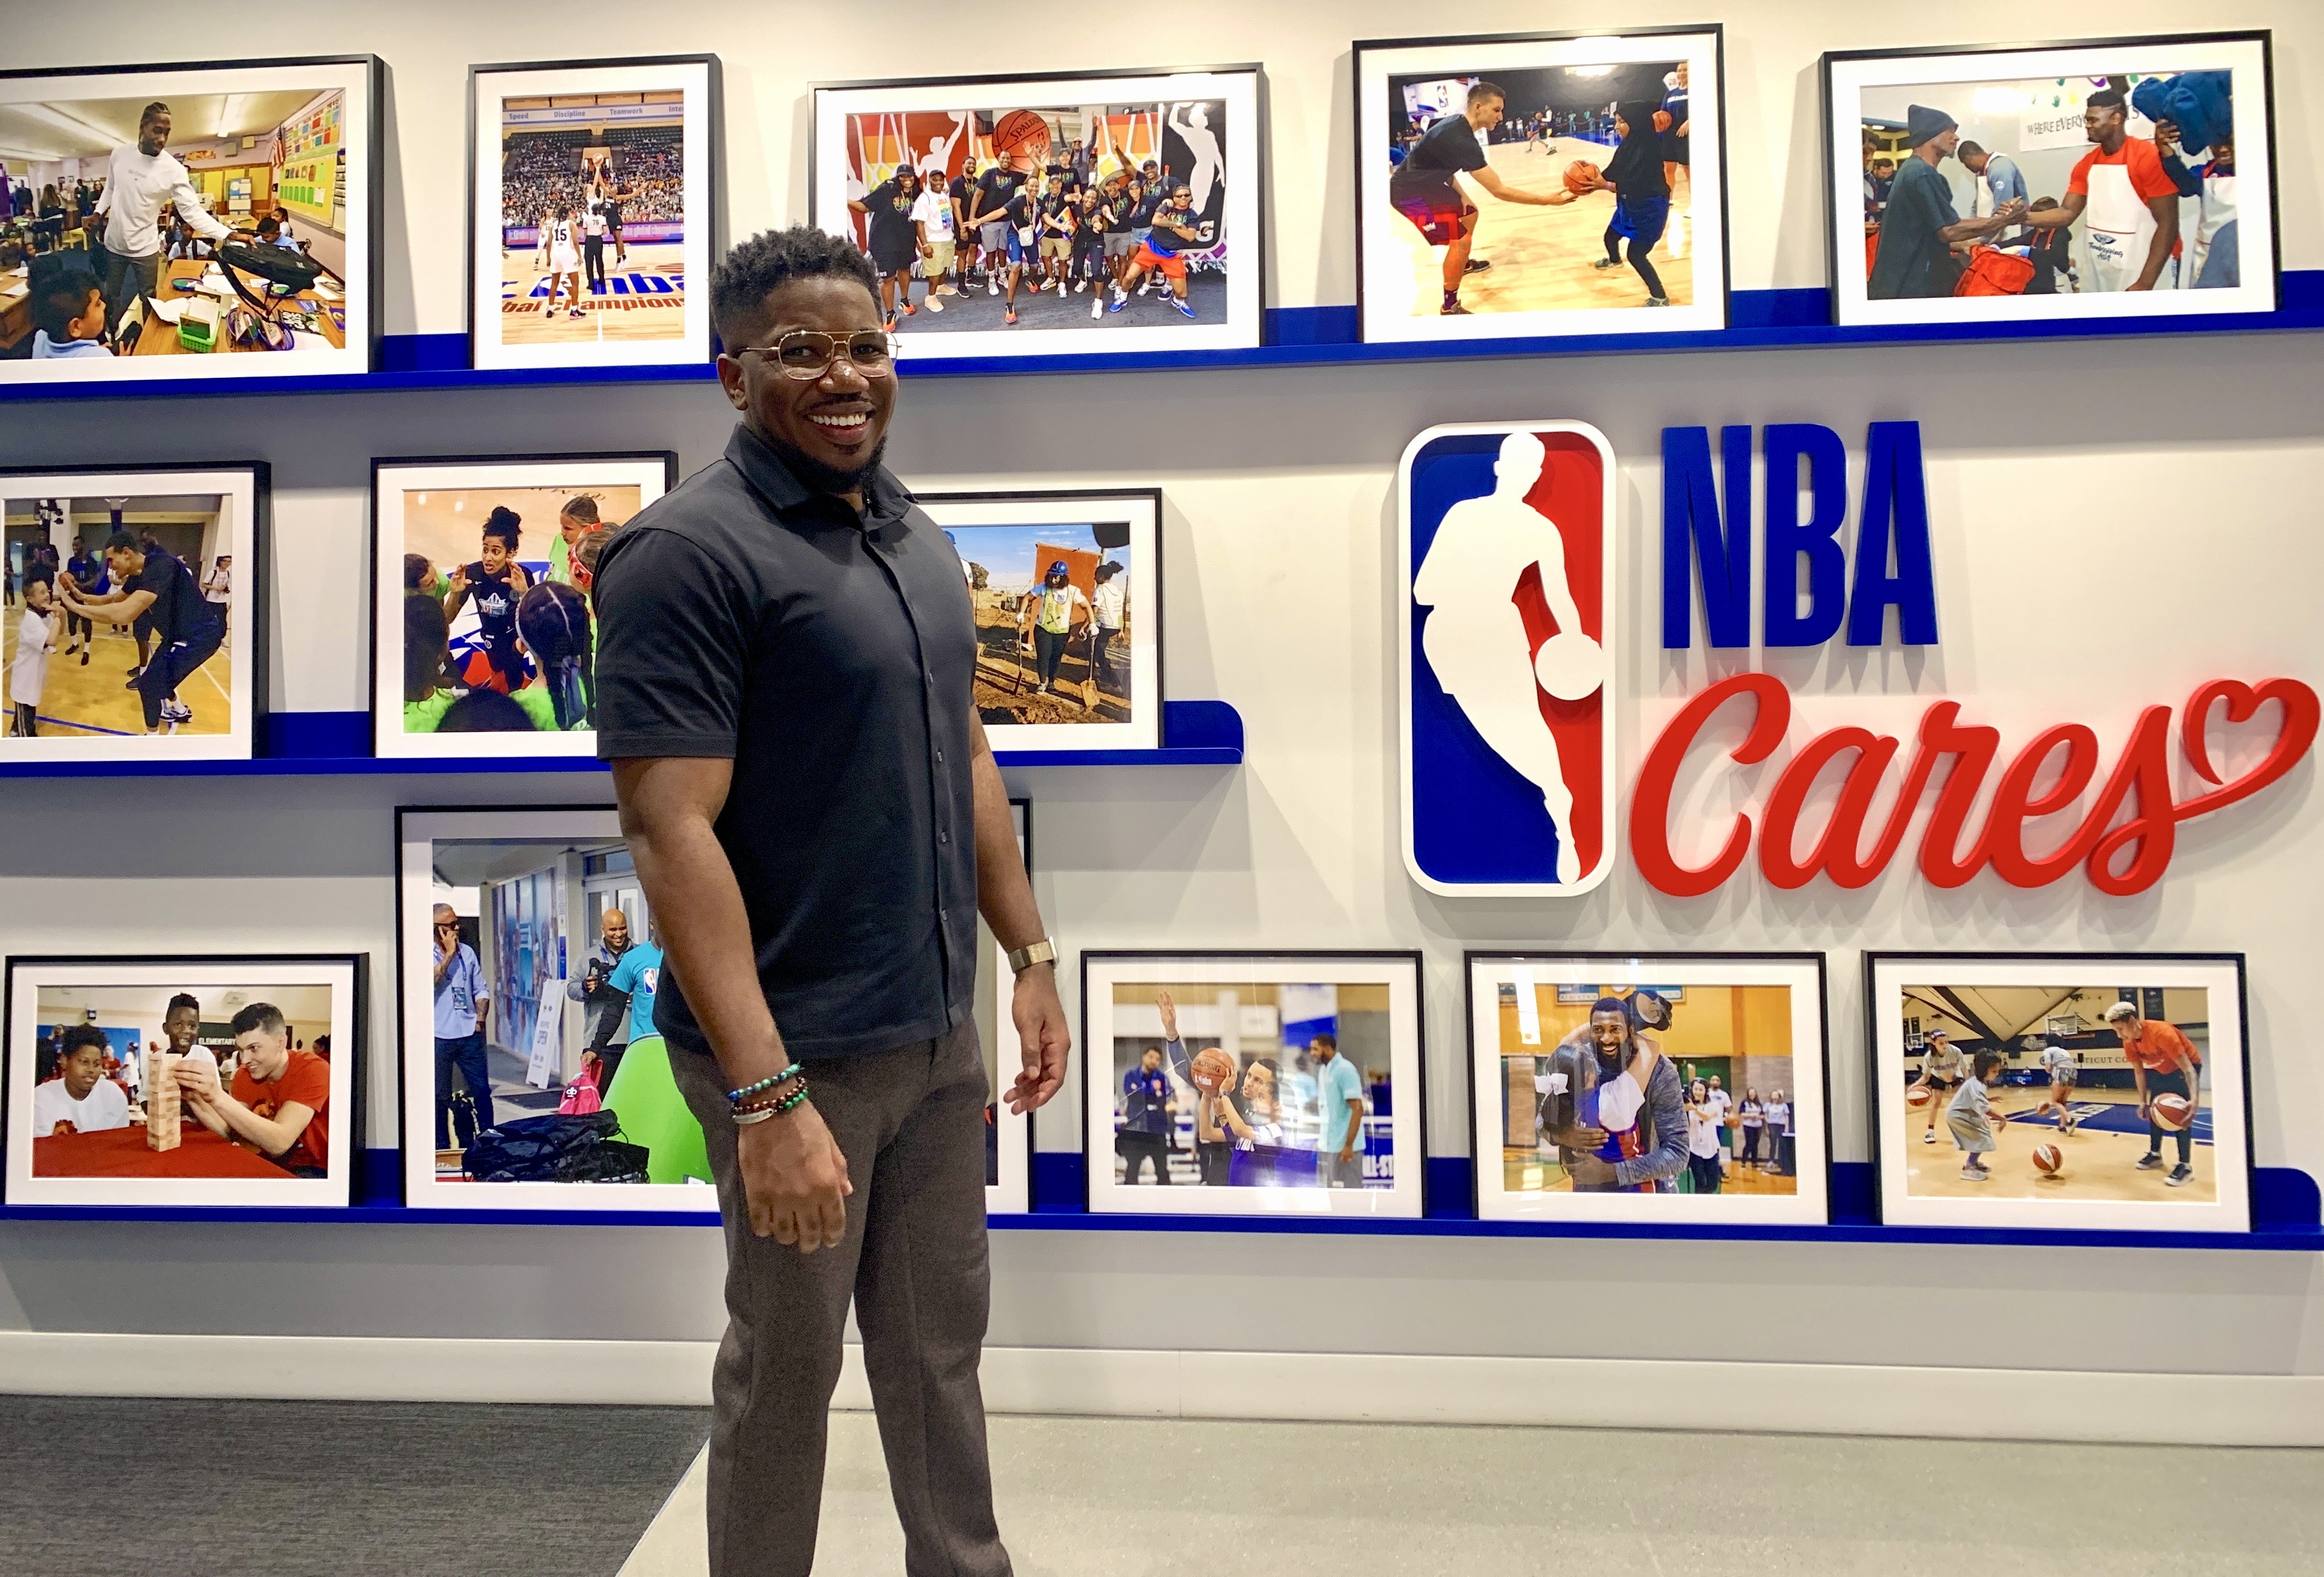 Jade Daniels in front of an NBA Cares sign and photos of NBA youth initiatives